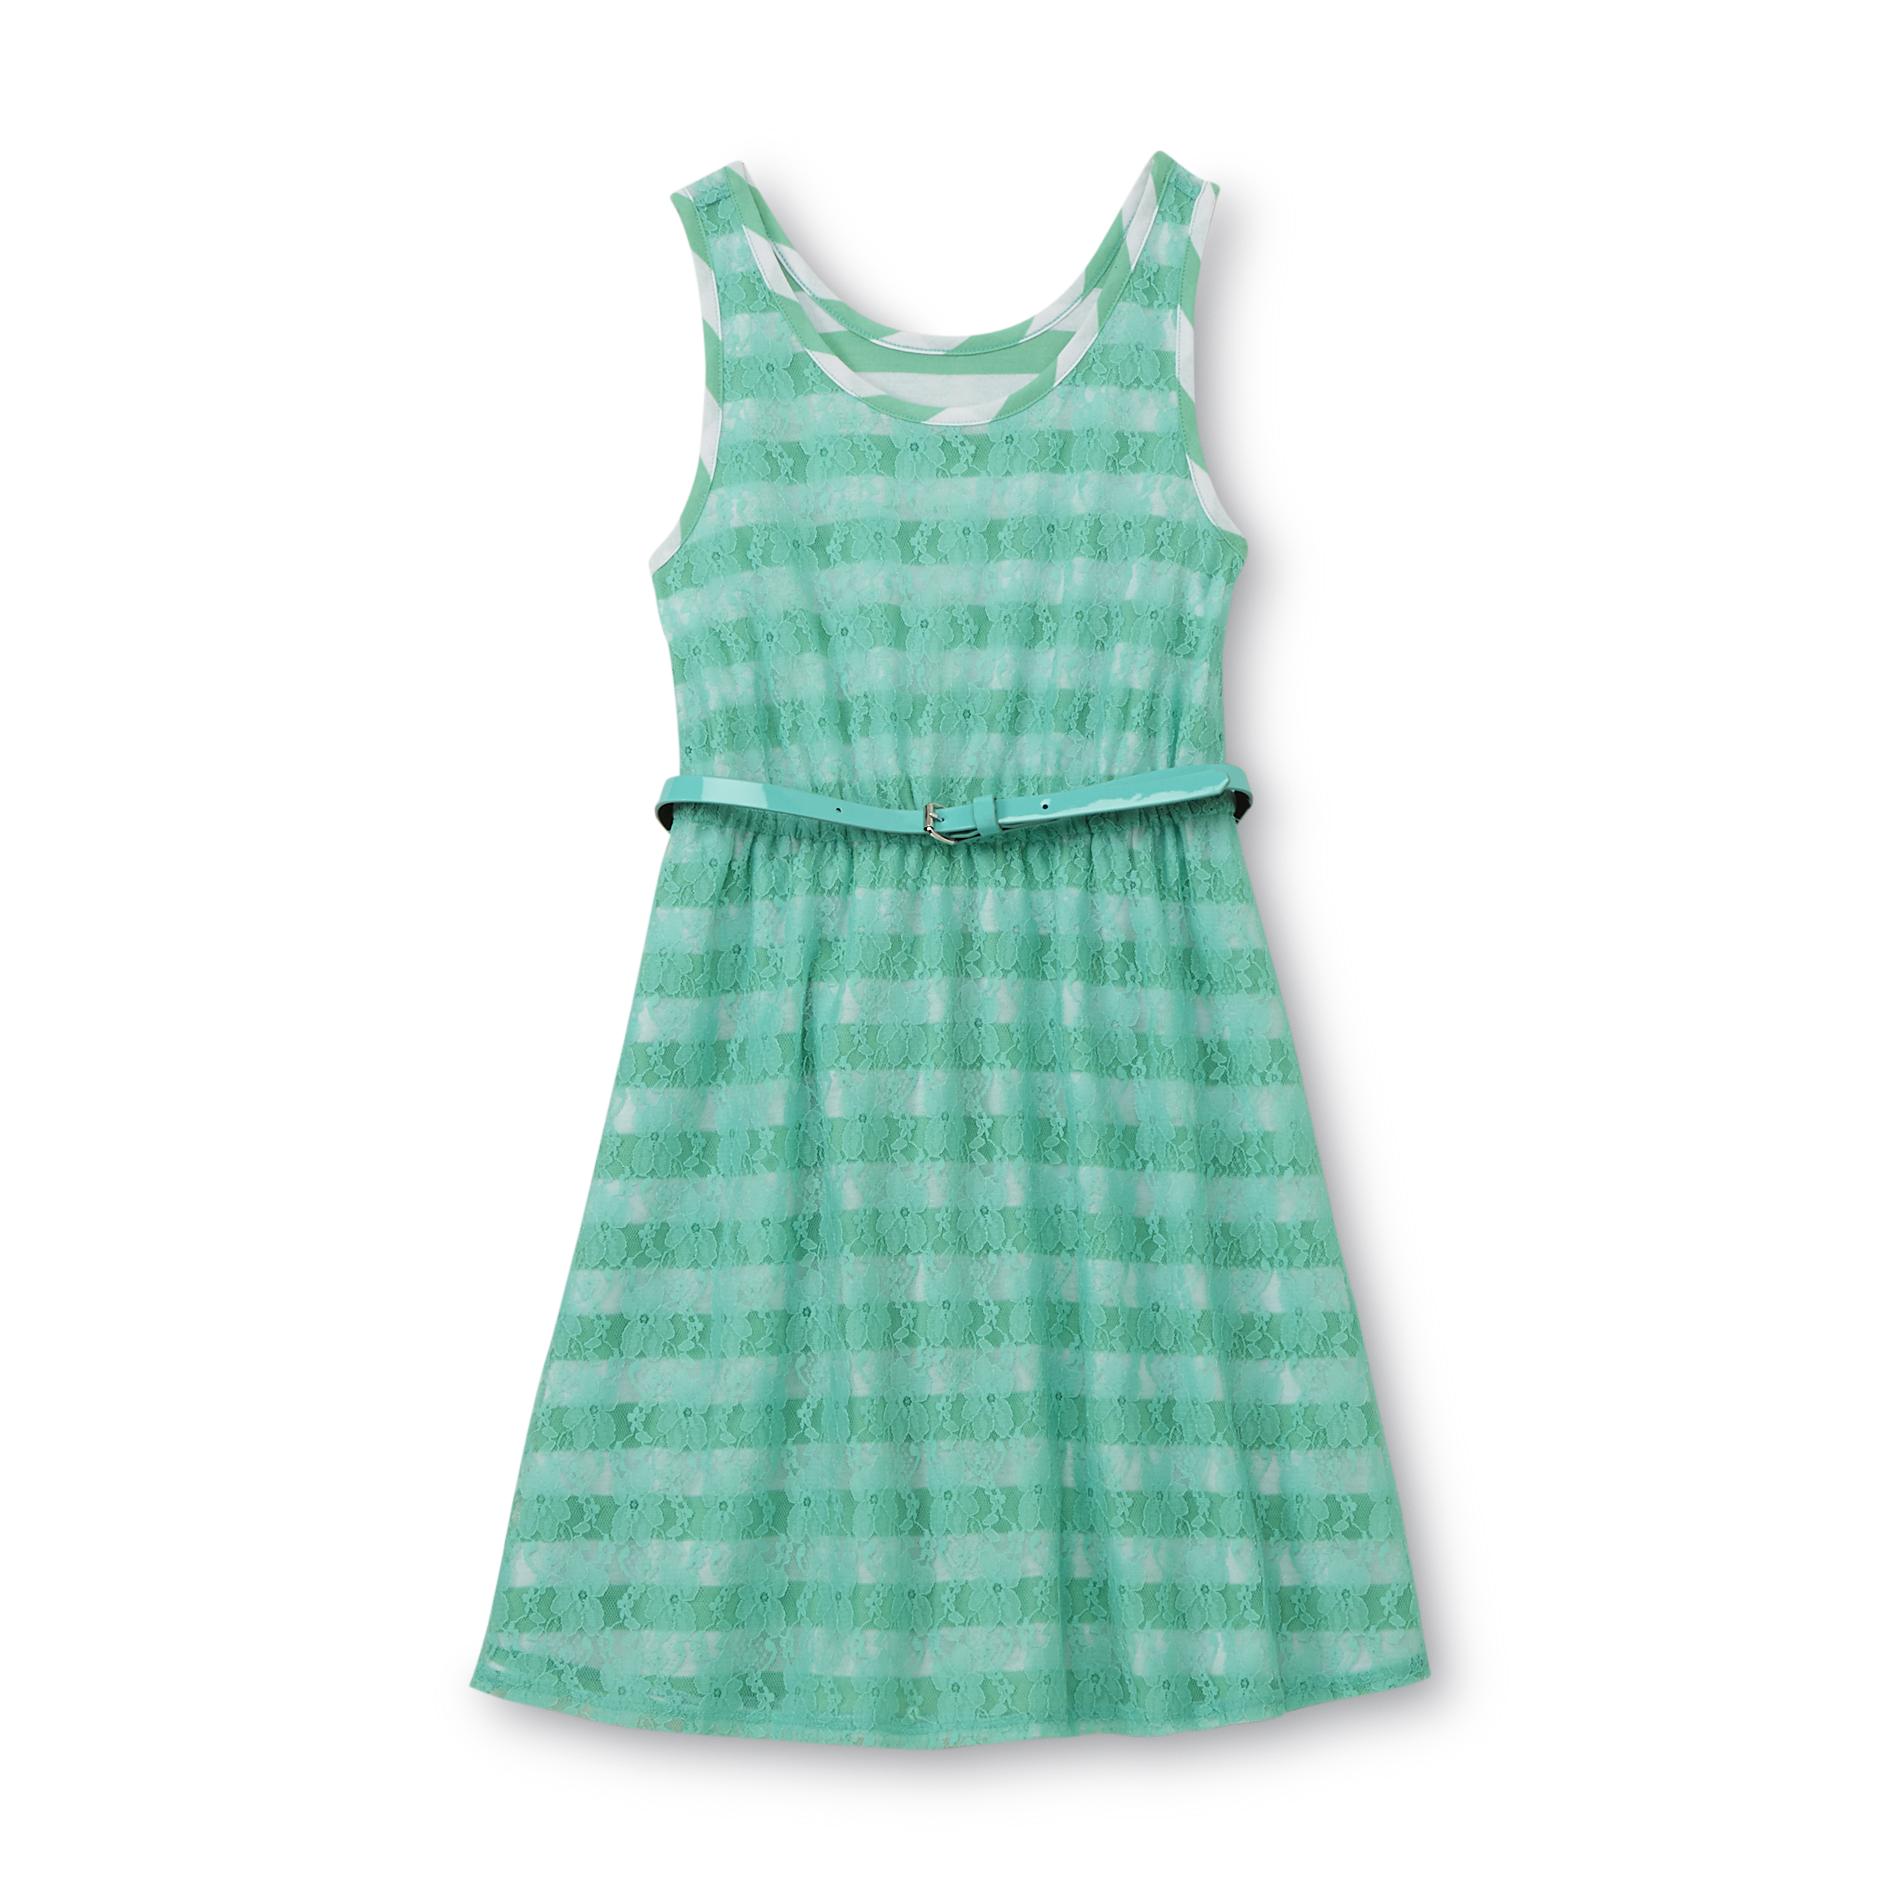 Route 66 Girl's Sleeveless Lace Dress & Belt - Striped